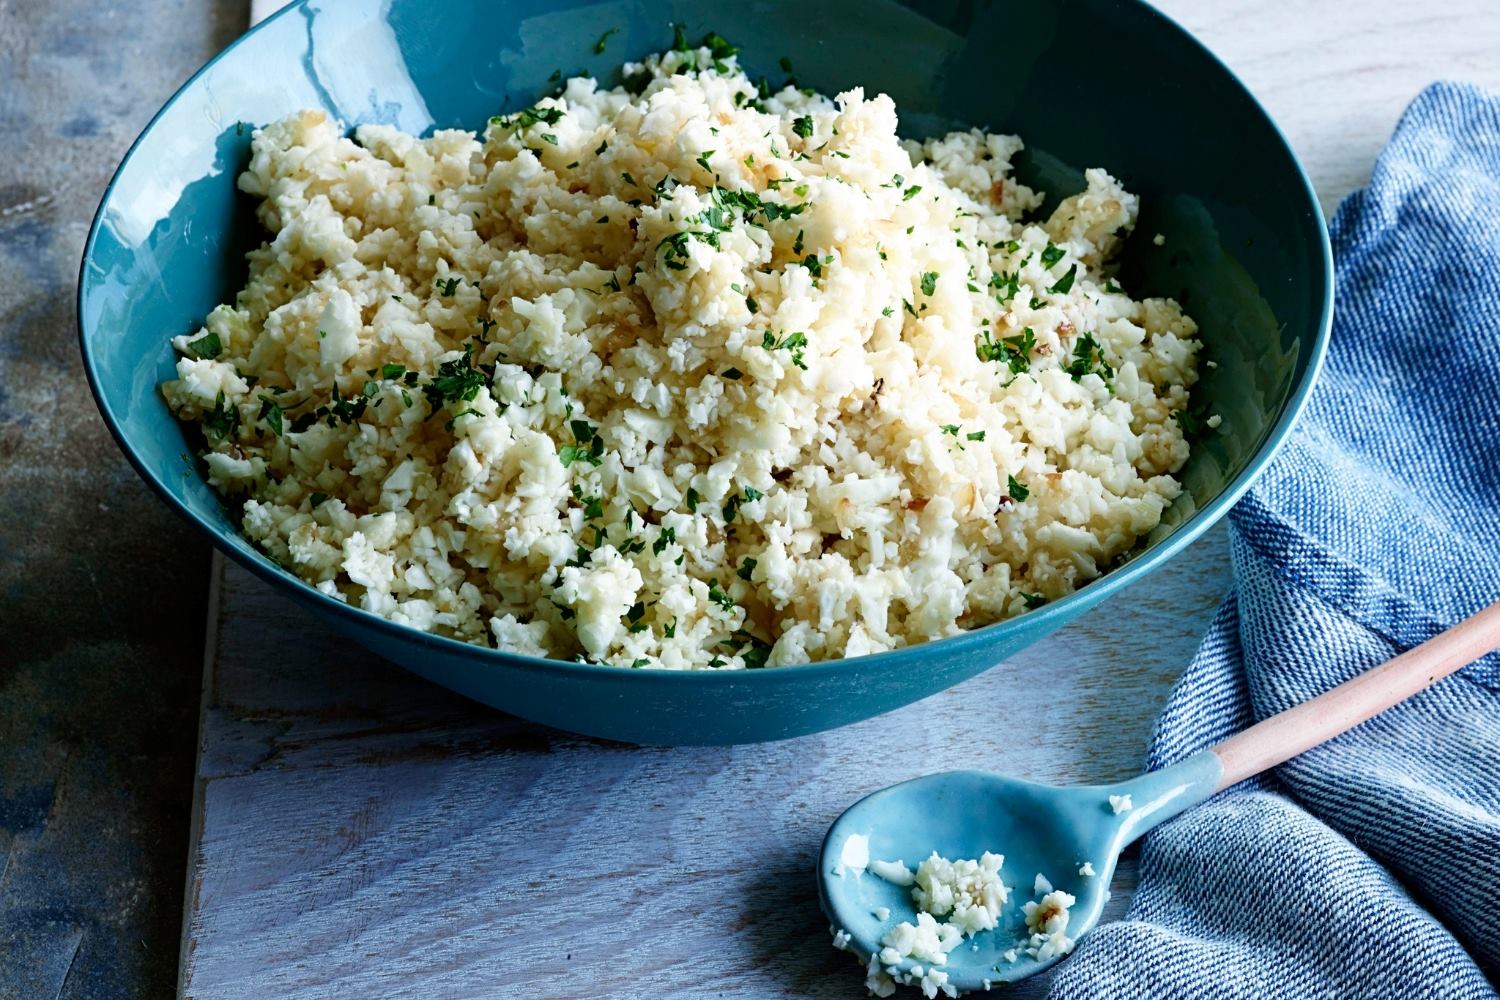 The Surprising Nutritional Benefits Of Cauliflower 'Rice' You Need To Know!